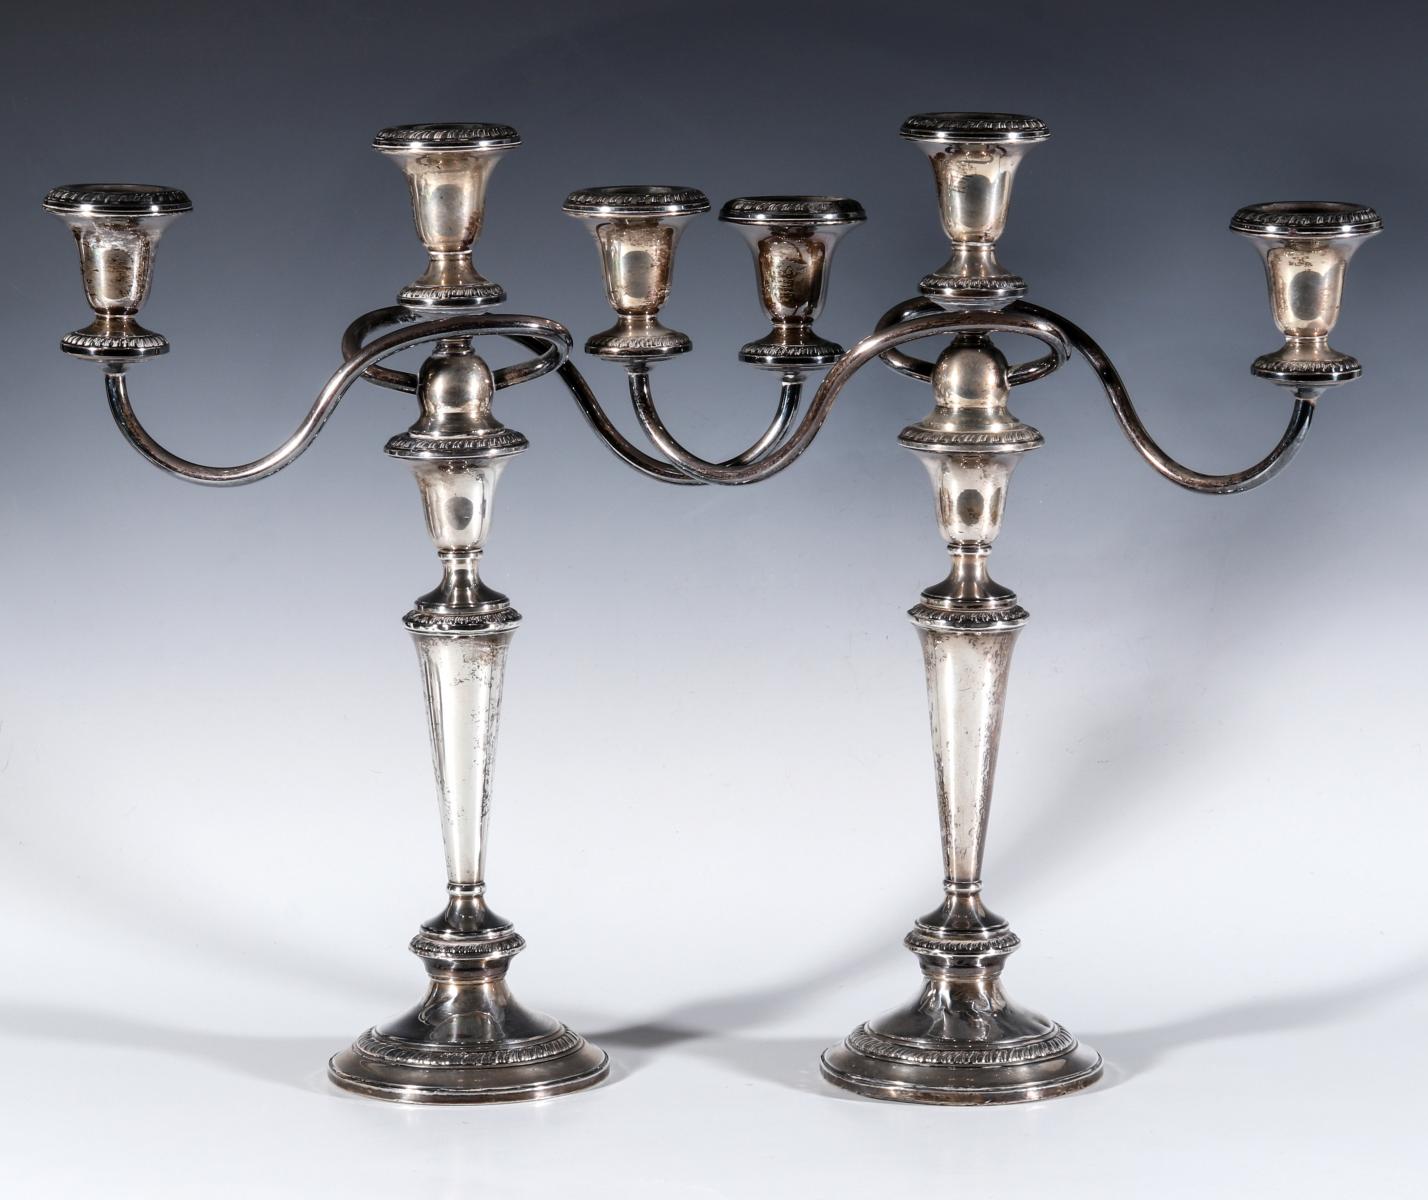 TWO PAIR 20TH C. FILLED STERLING SILVER CANDELABRA